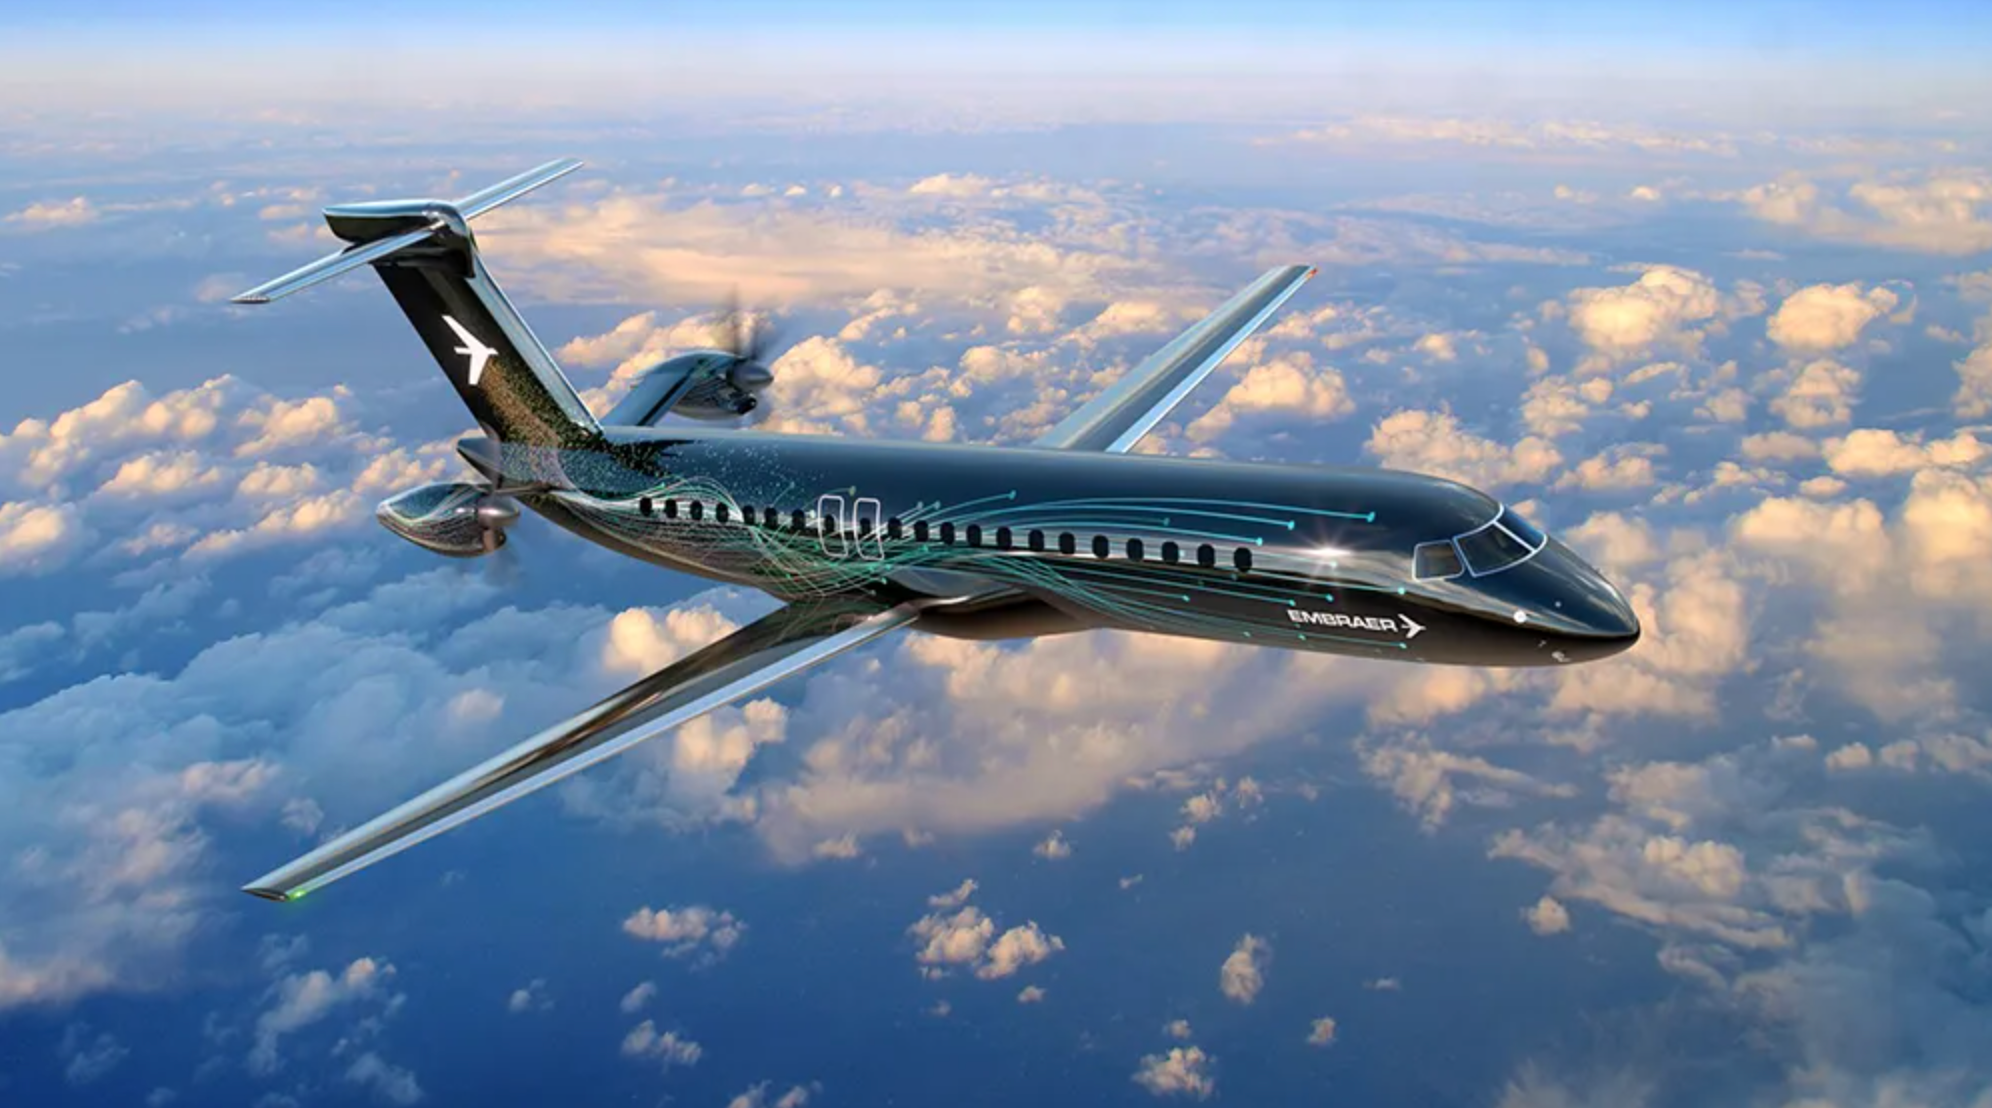 Embraer turboprop aircraft